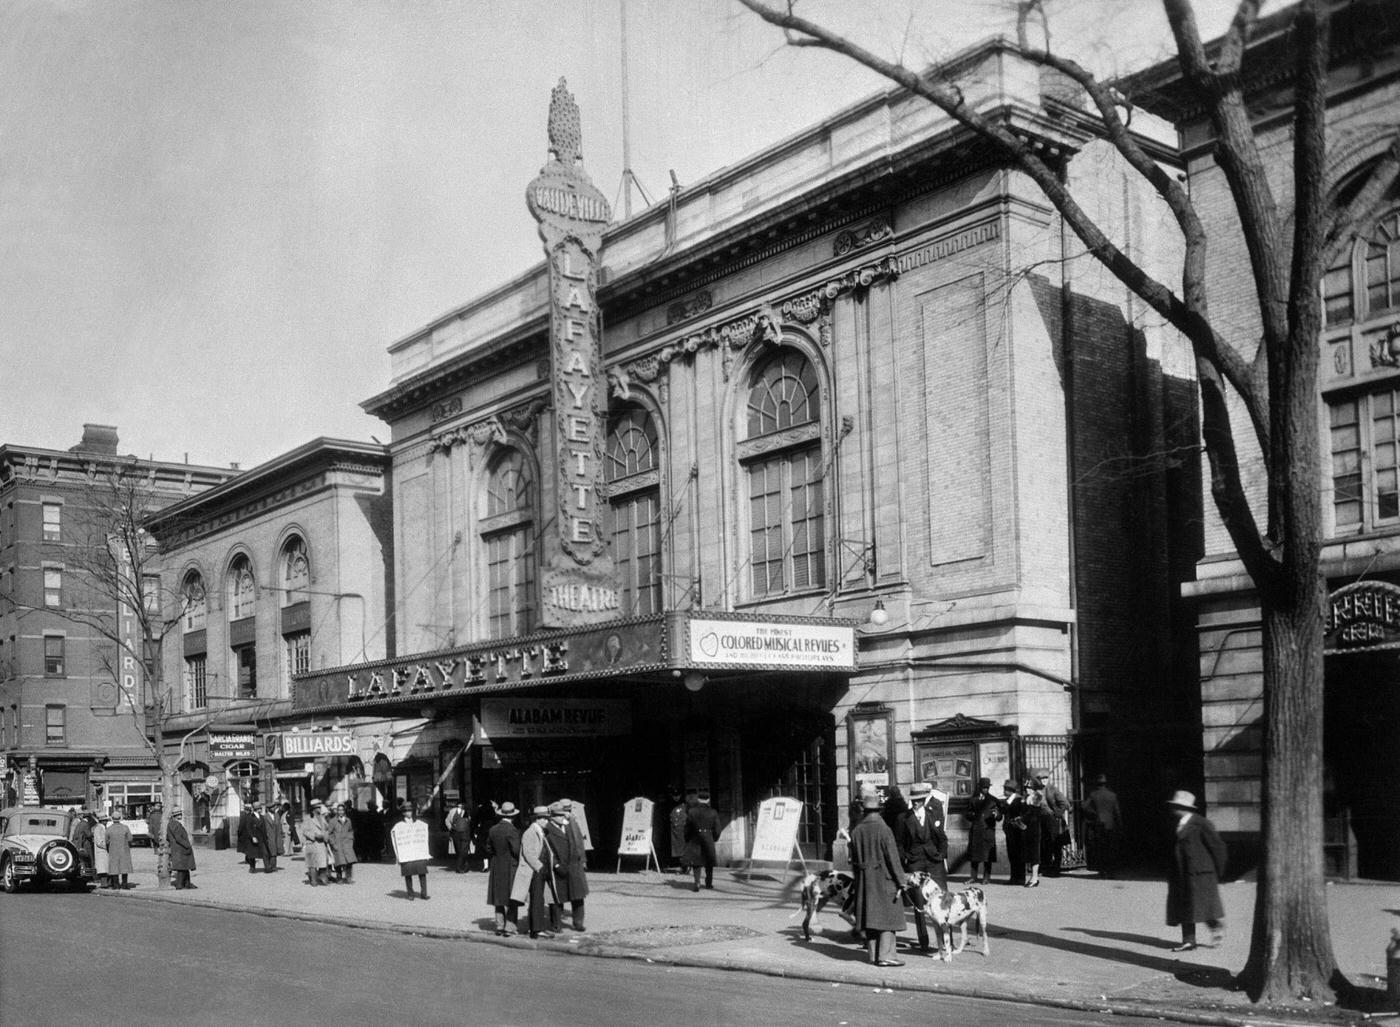 Lafayette Theatre In Harlem, 7Th Avenue Between 131St And 132Nd Streets, Manhattan, 1927.